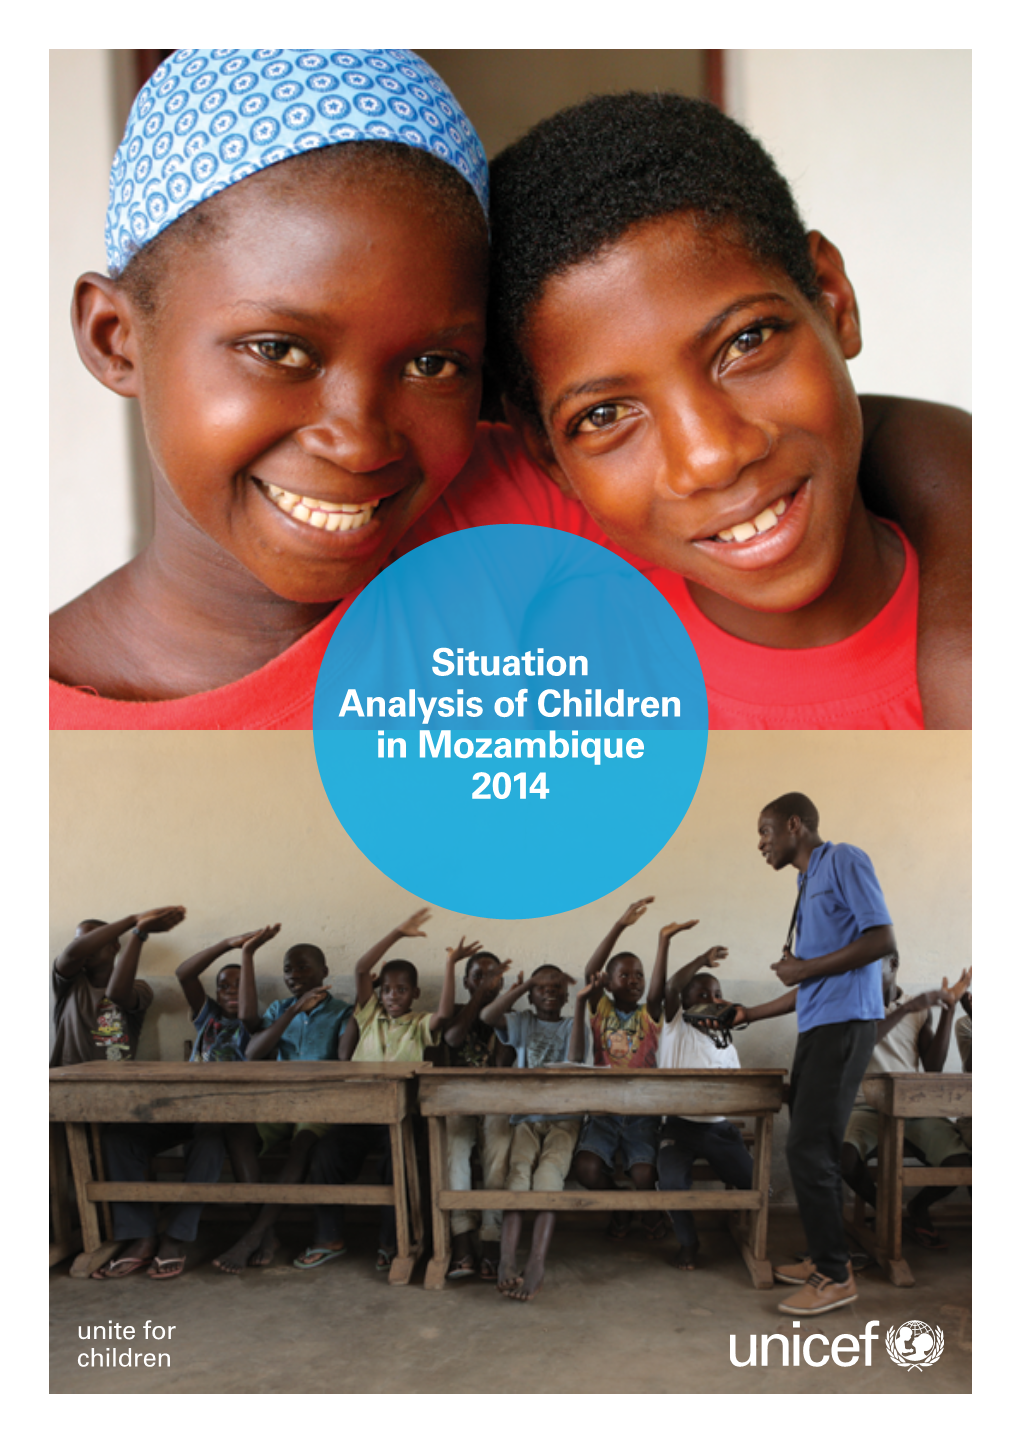 Situation Analysis of Children in Mozambique 2014